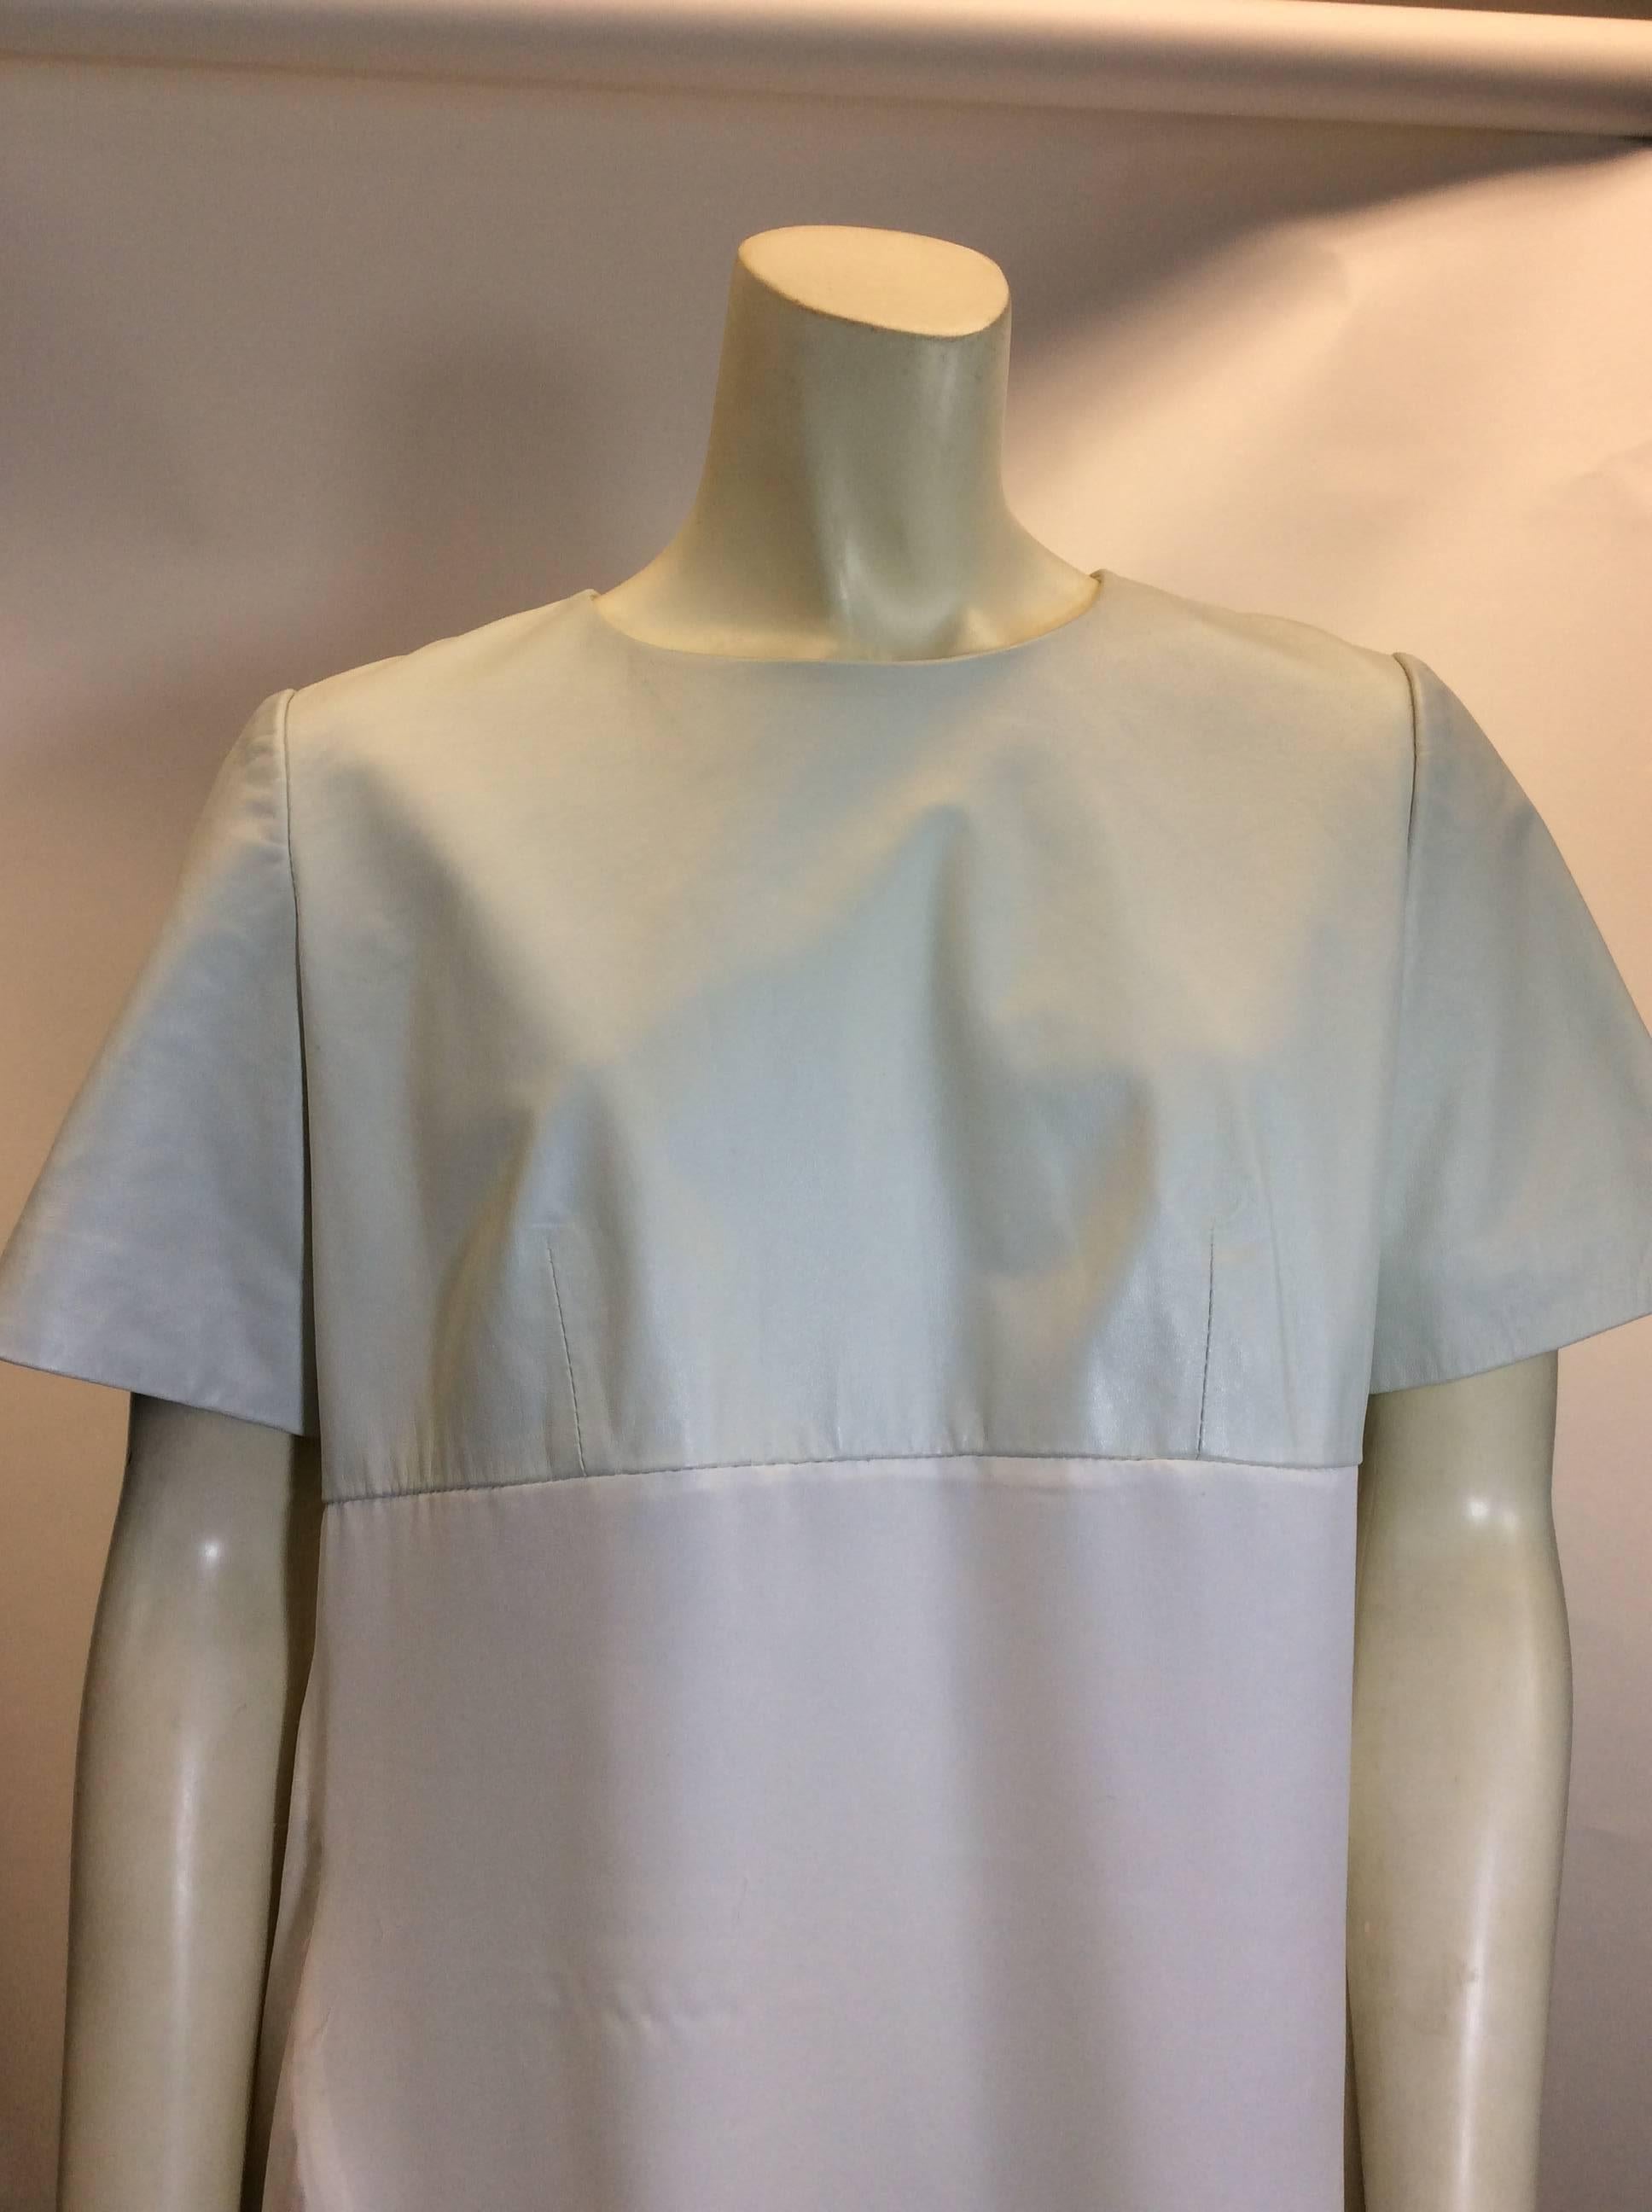 Anveglosa Silk & Leather Blouse
Size medium
$225
100% silk , 100% leather
Made in Hong Kong
High low style
Zip up back 
*there are a few pulls on the silk section, please see photo